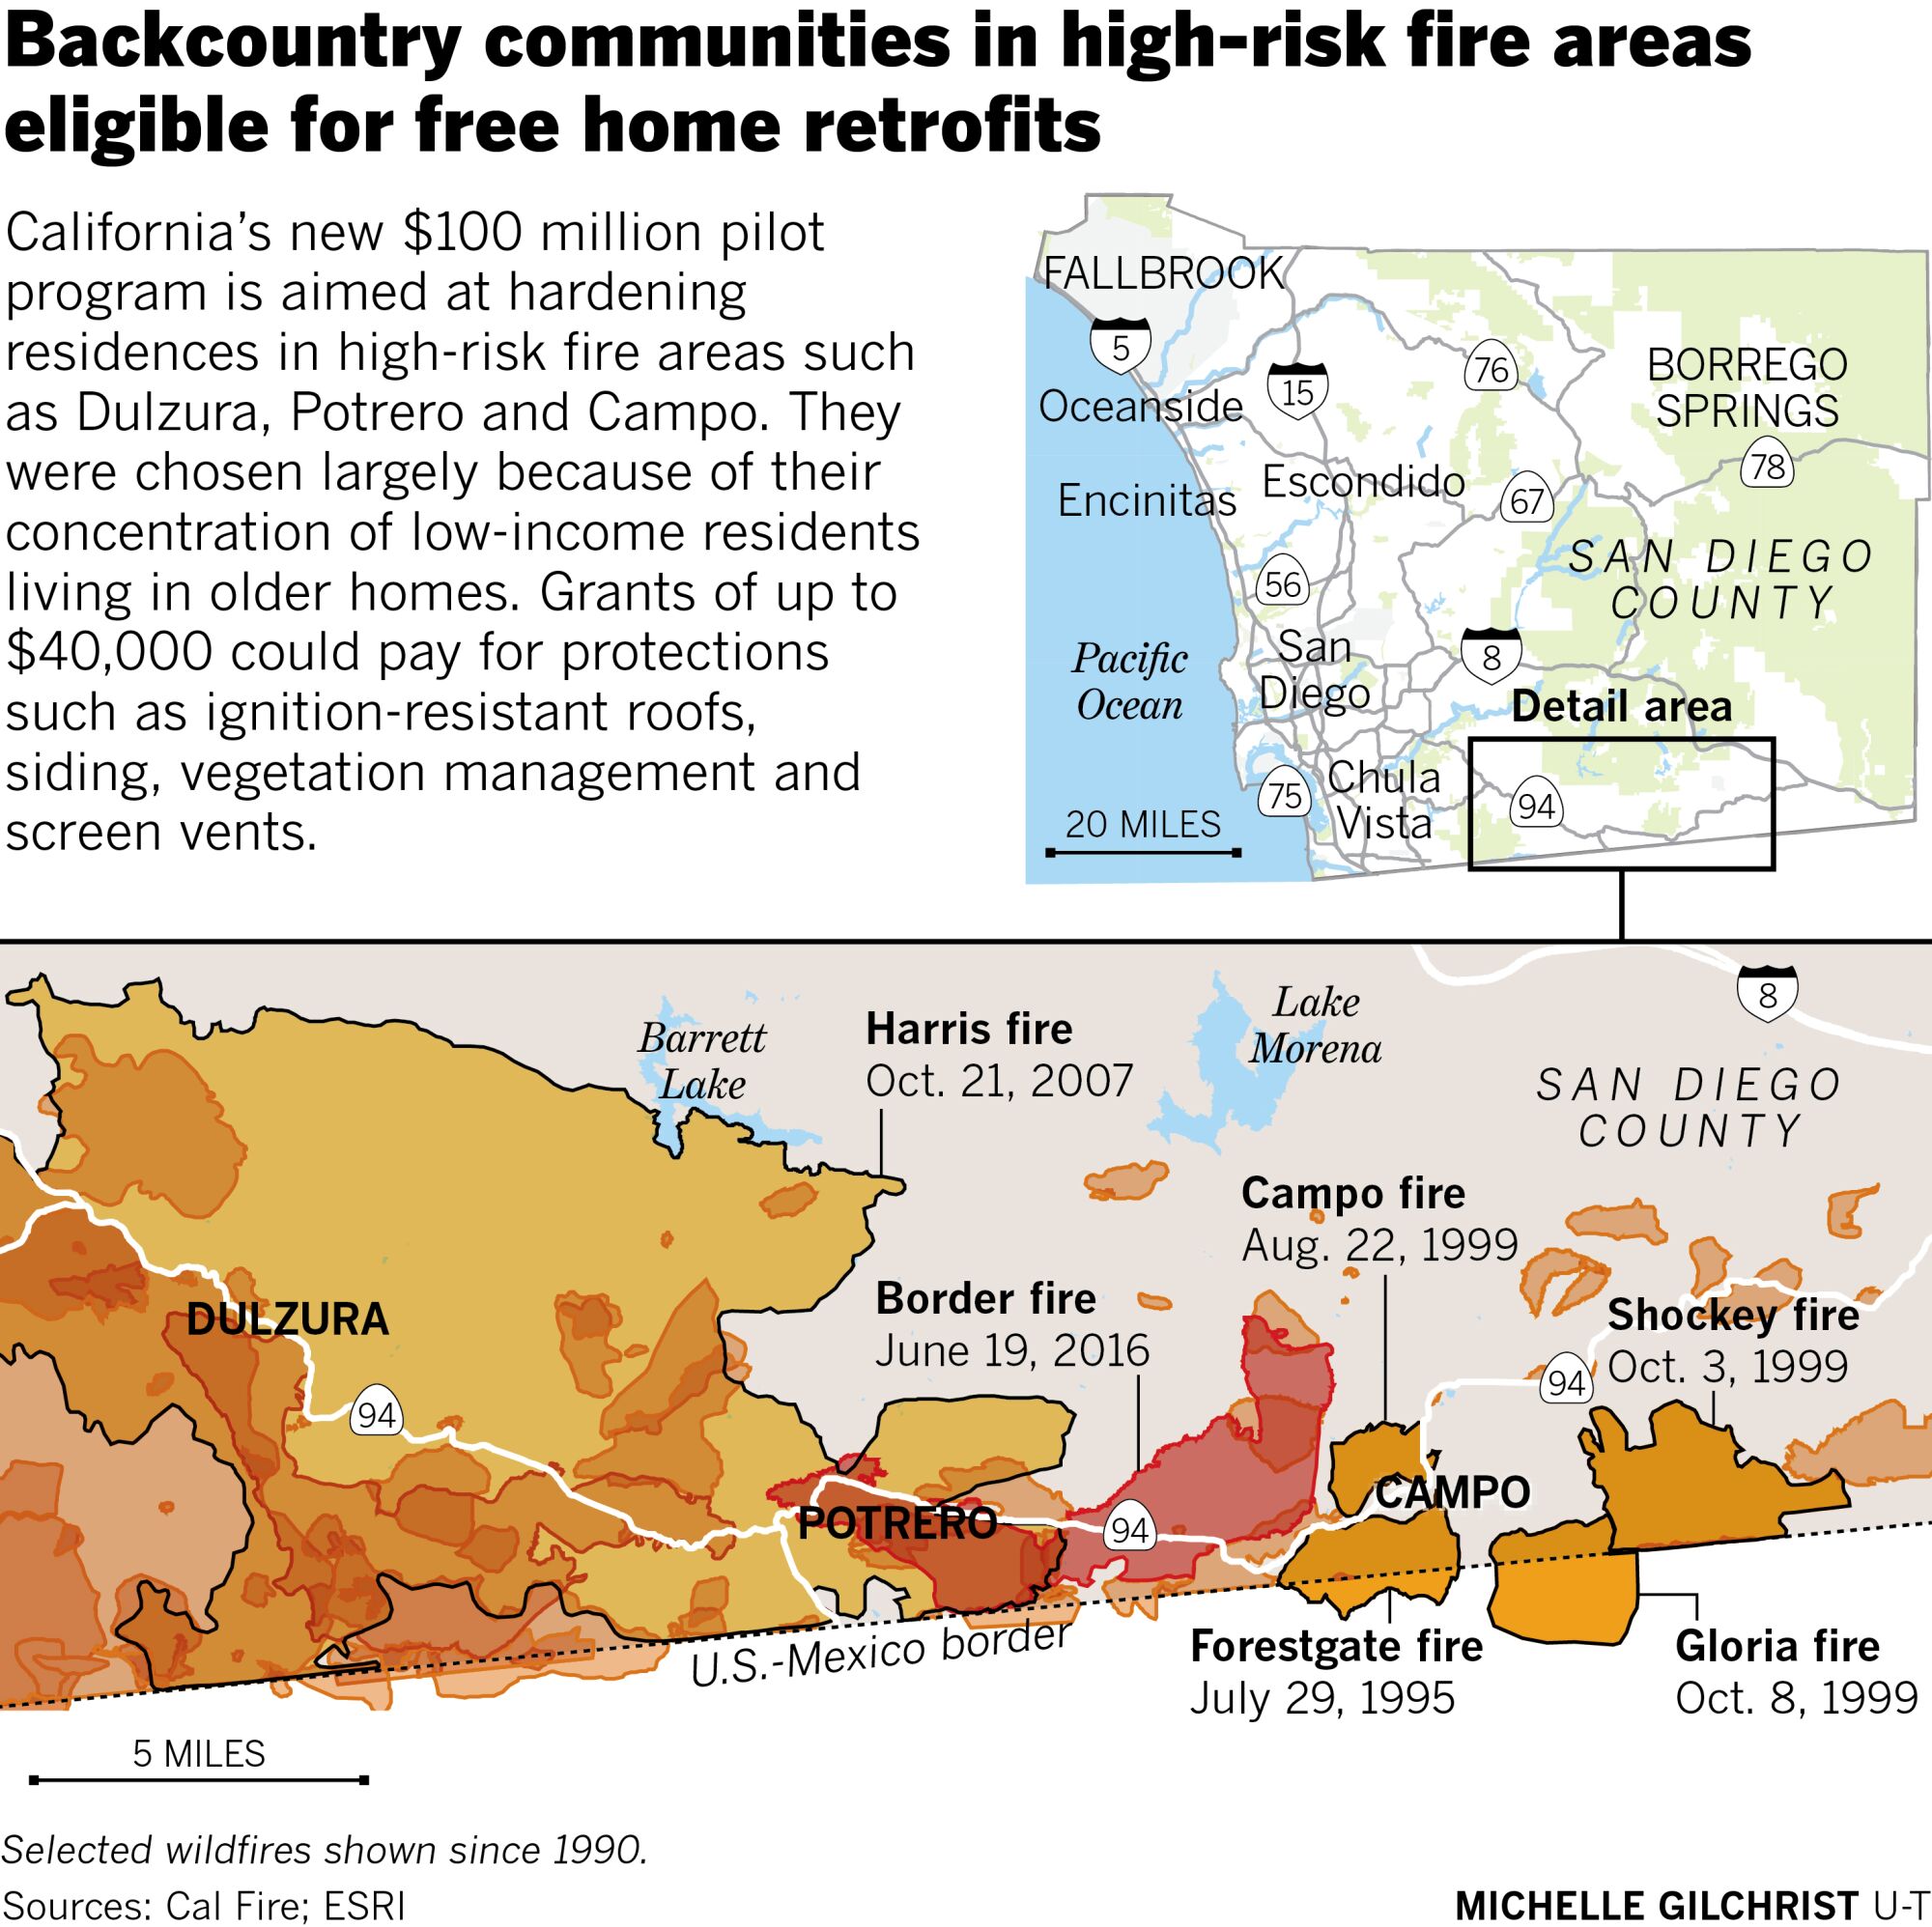 Backcountry communities in high-risk fire areas eligible for home retrofits